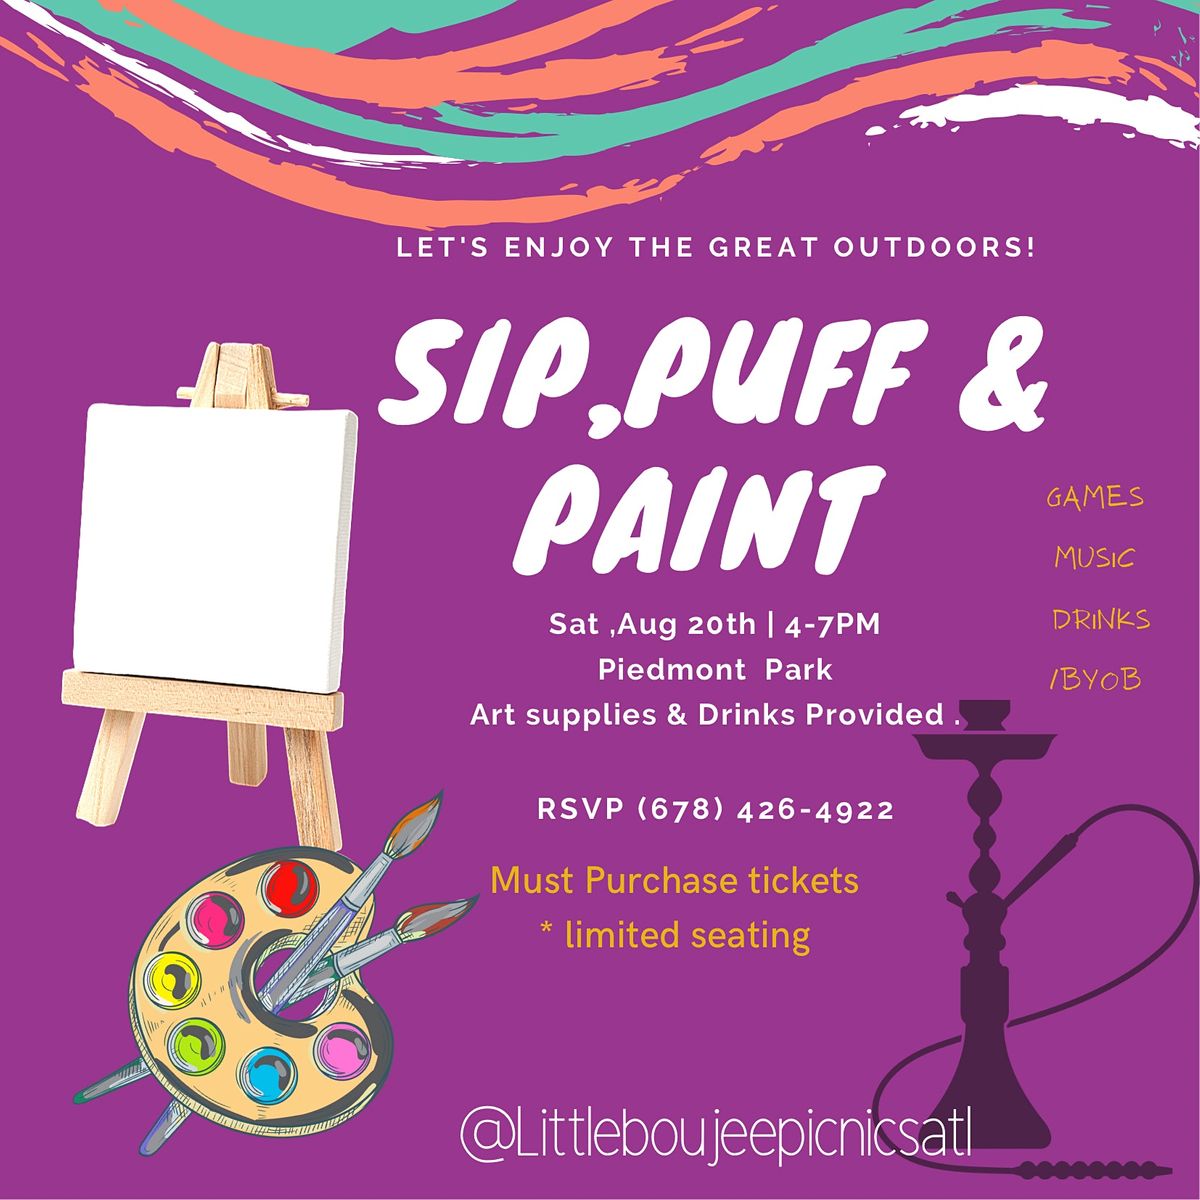 Sip & paint in the Park